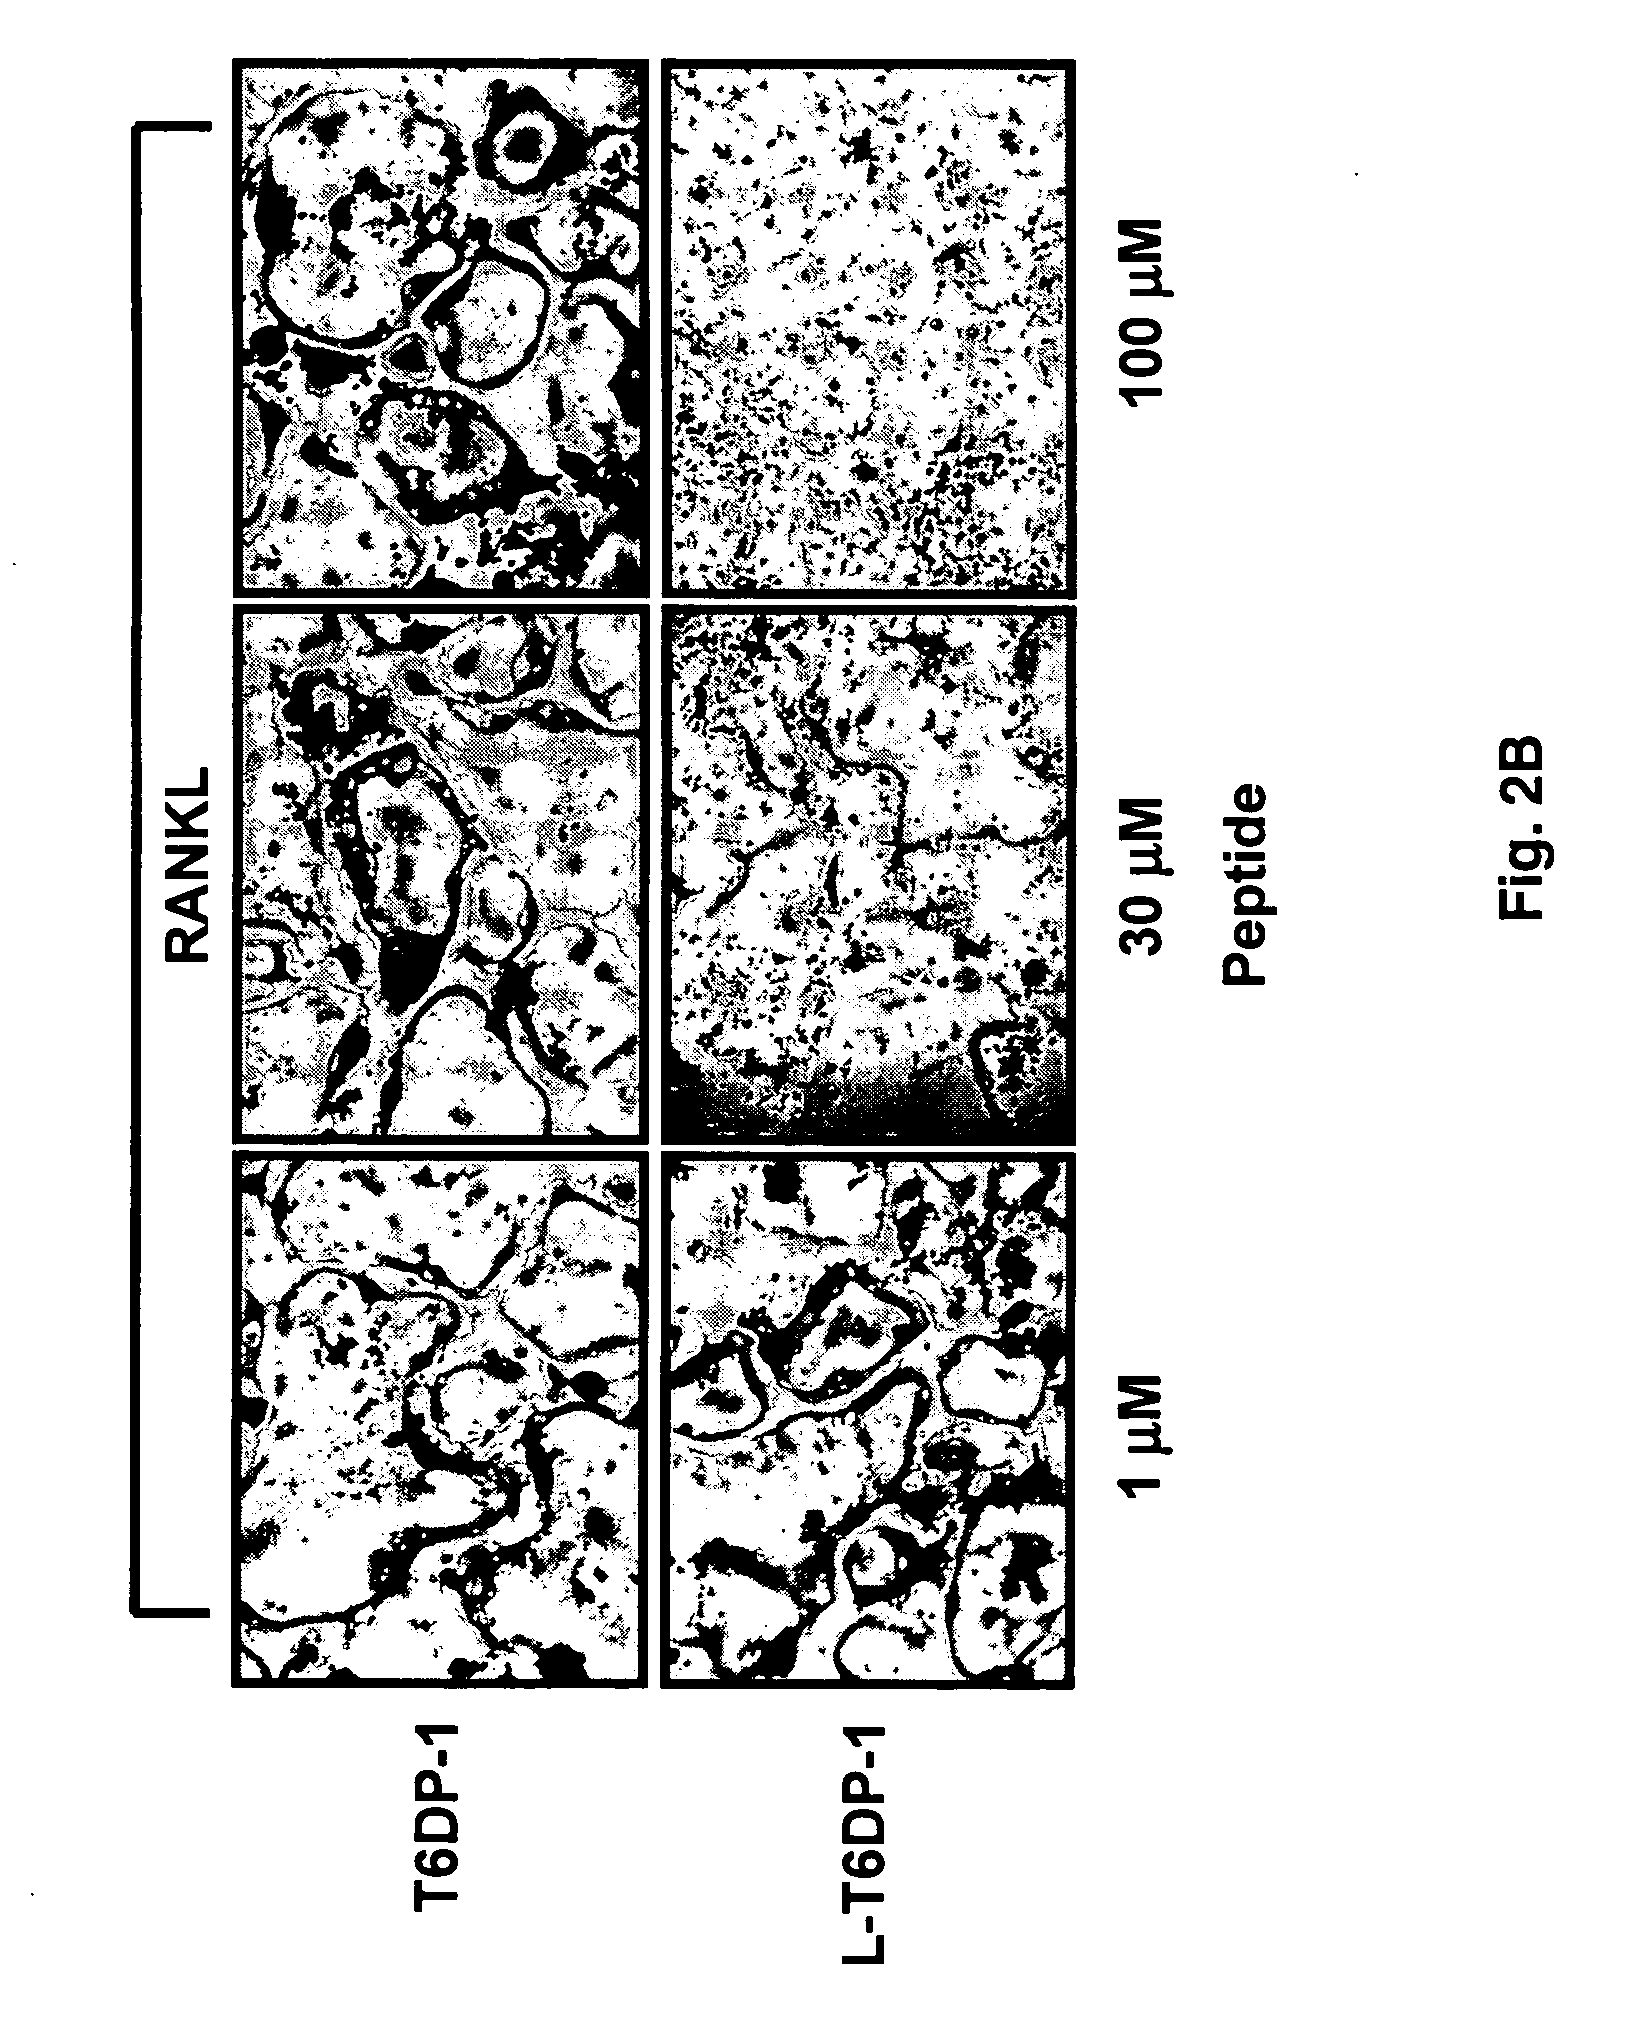 Inhibitors of receptor activator of NF-kappaB and uses thereof